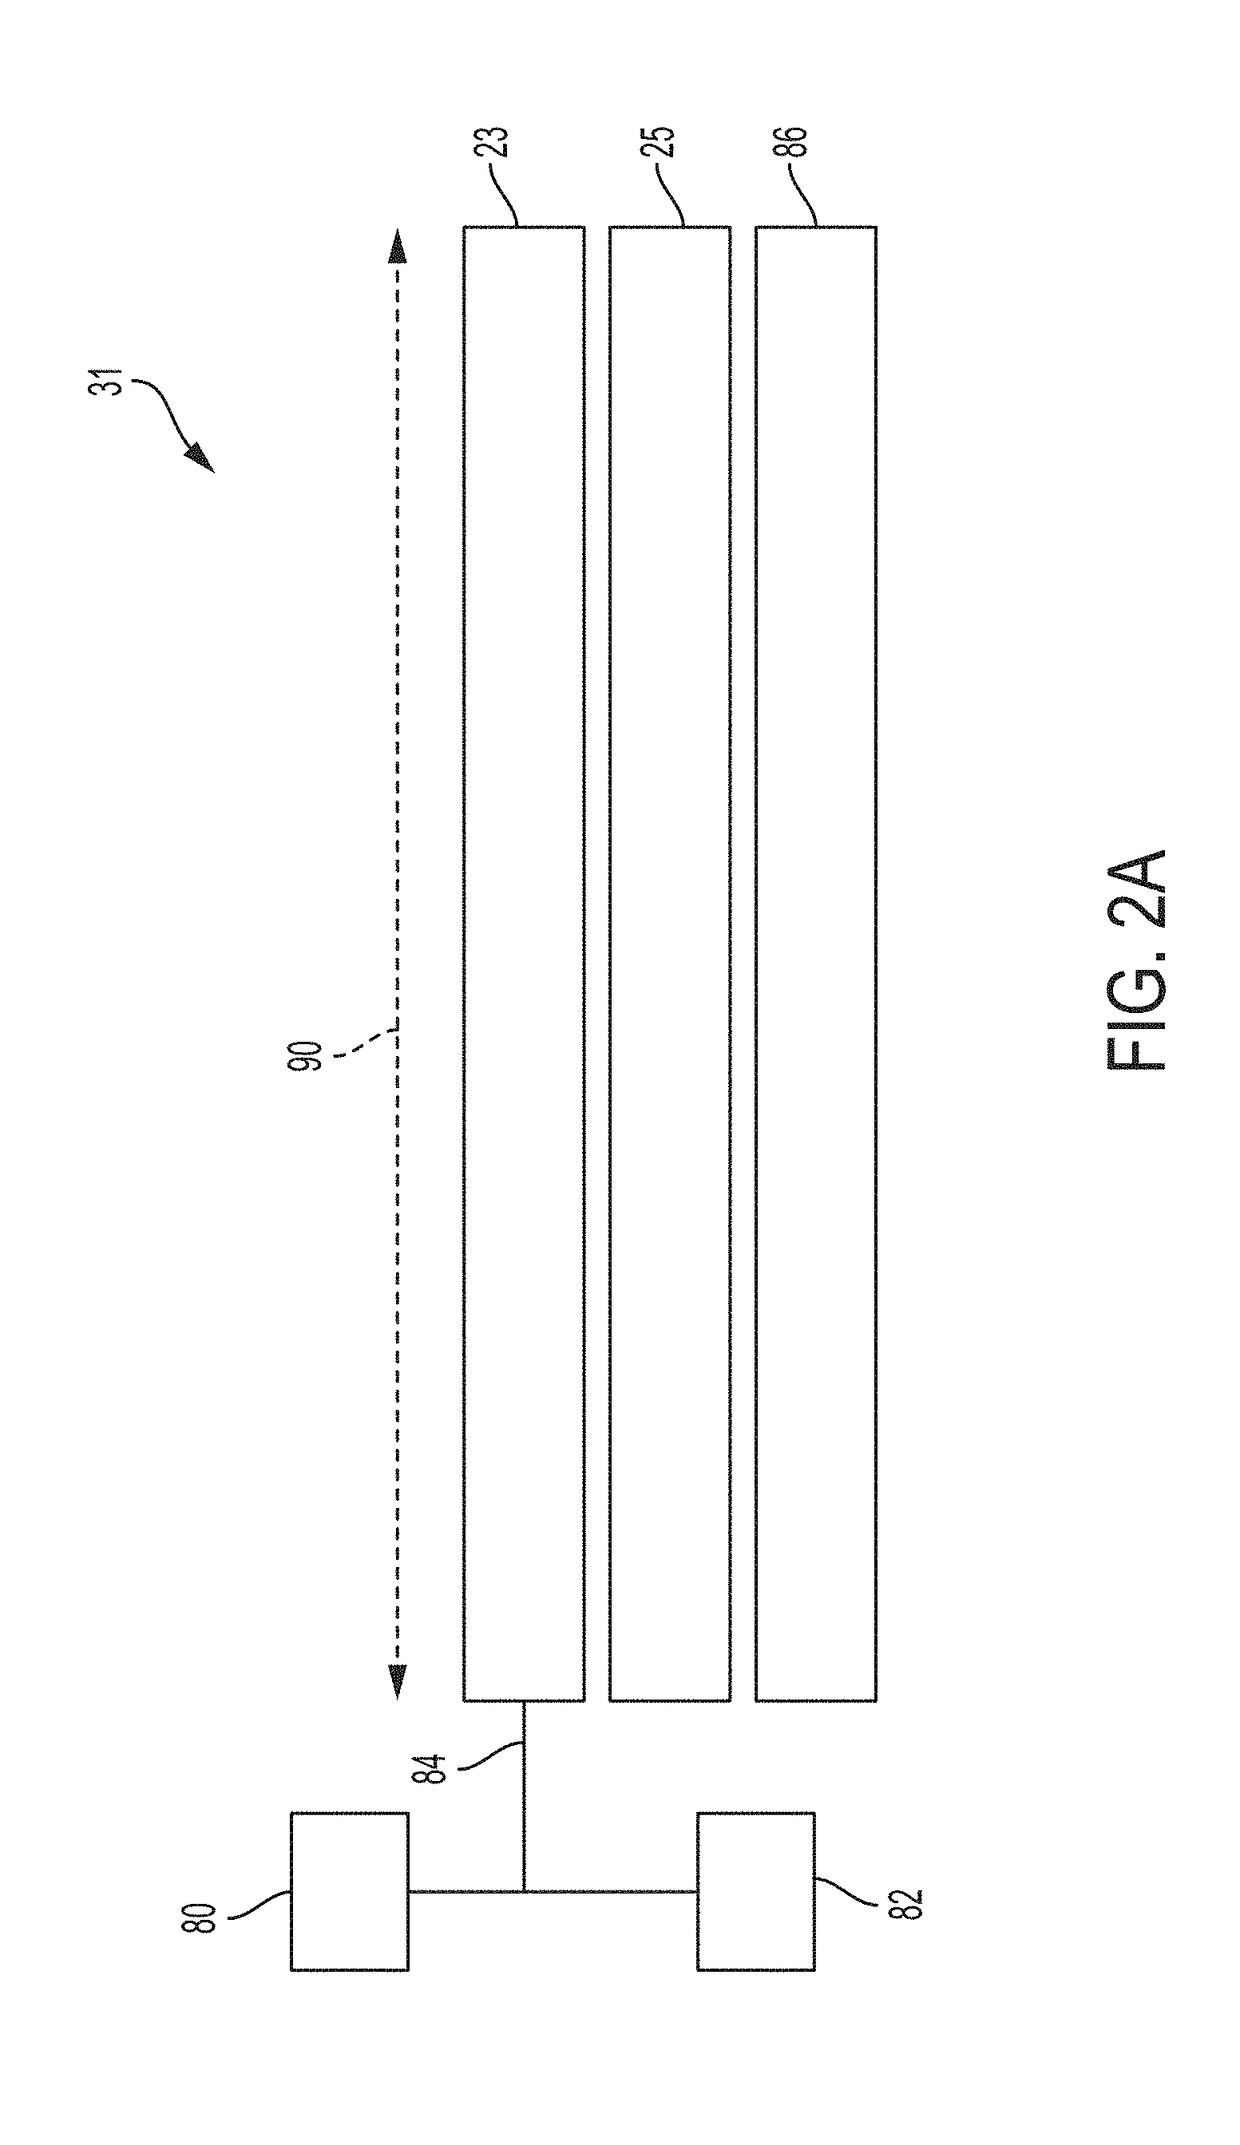 Multifunctional thermal management system and related method